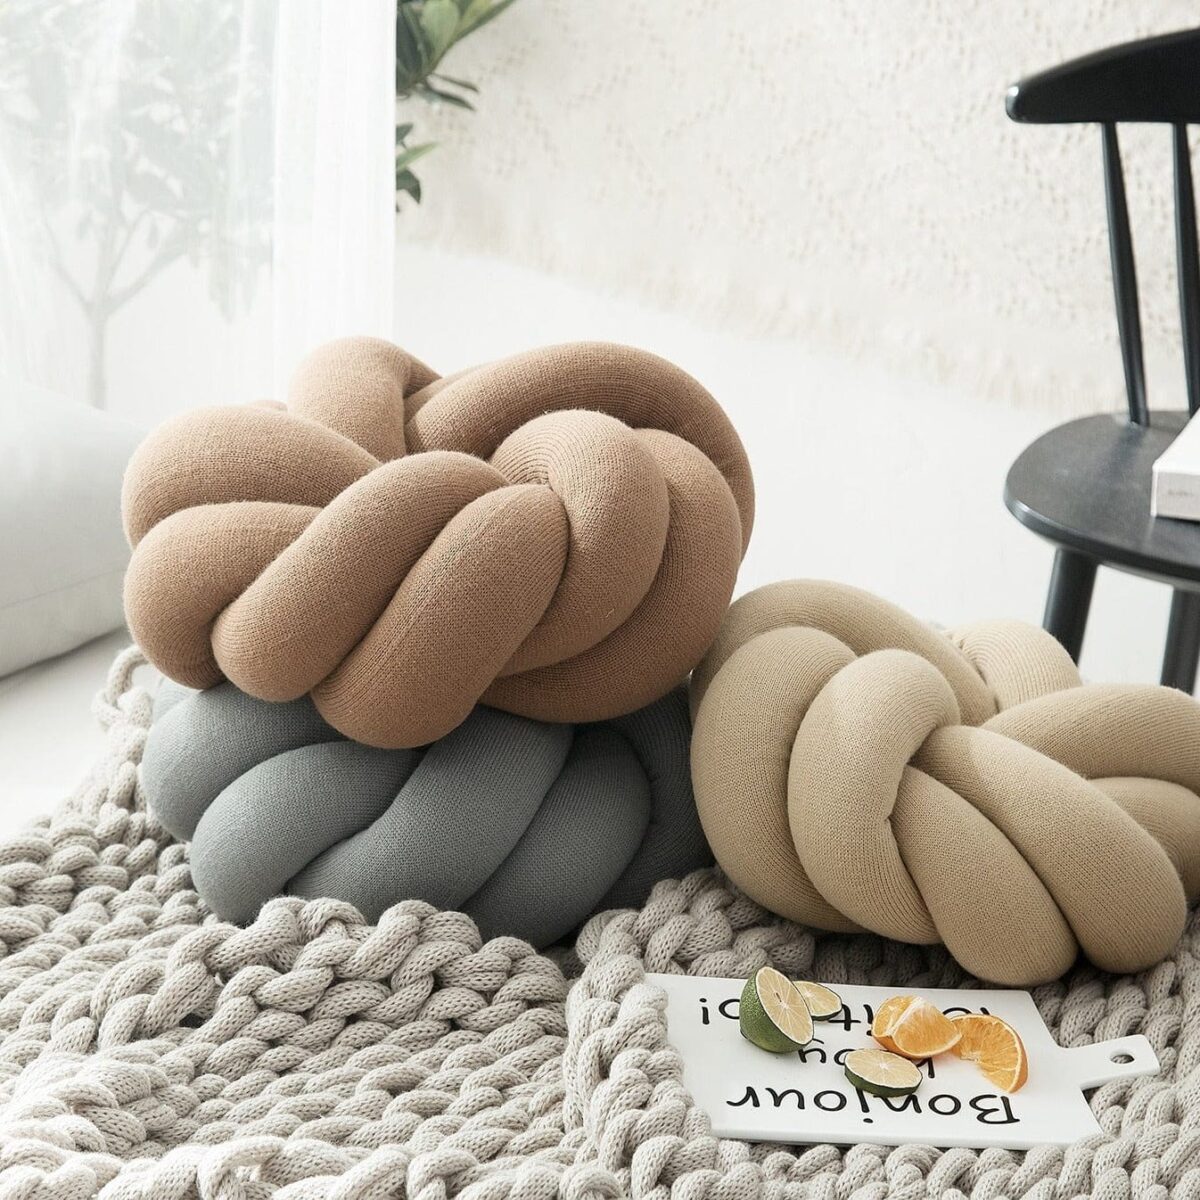 Daedalus Designs - Knot Cozy Cushions - Review